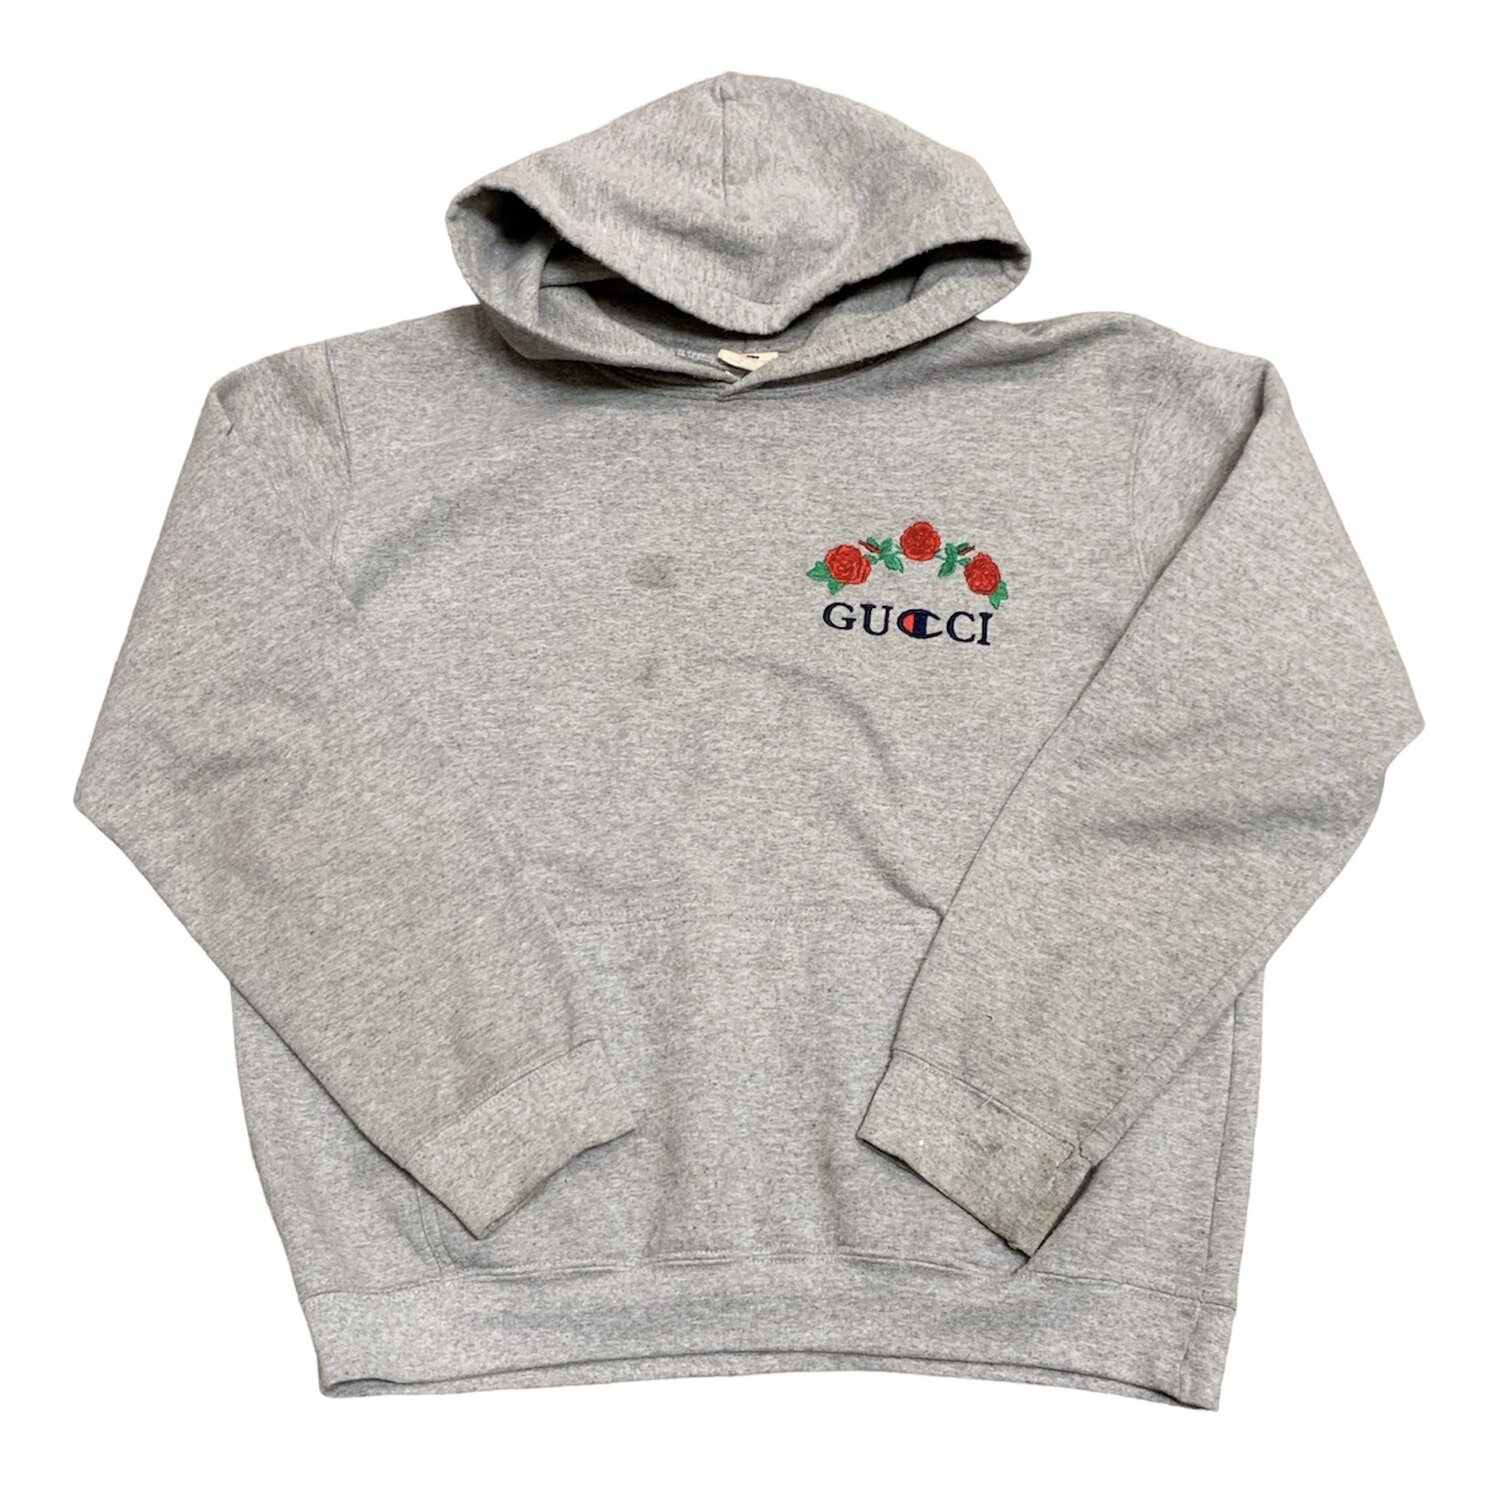 Følsom uddannelse sollys CHAMPION GUCCI ROSES EMBROIDERED HOODIE — Chaotic Closet